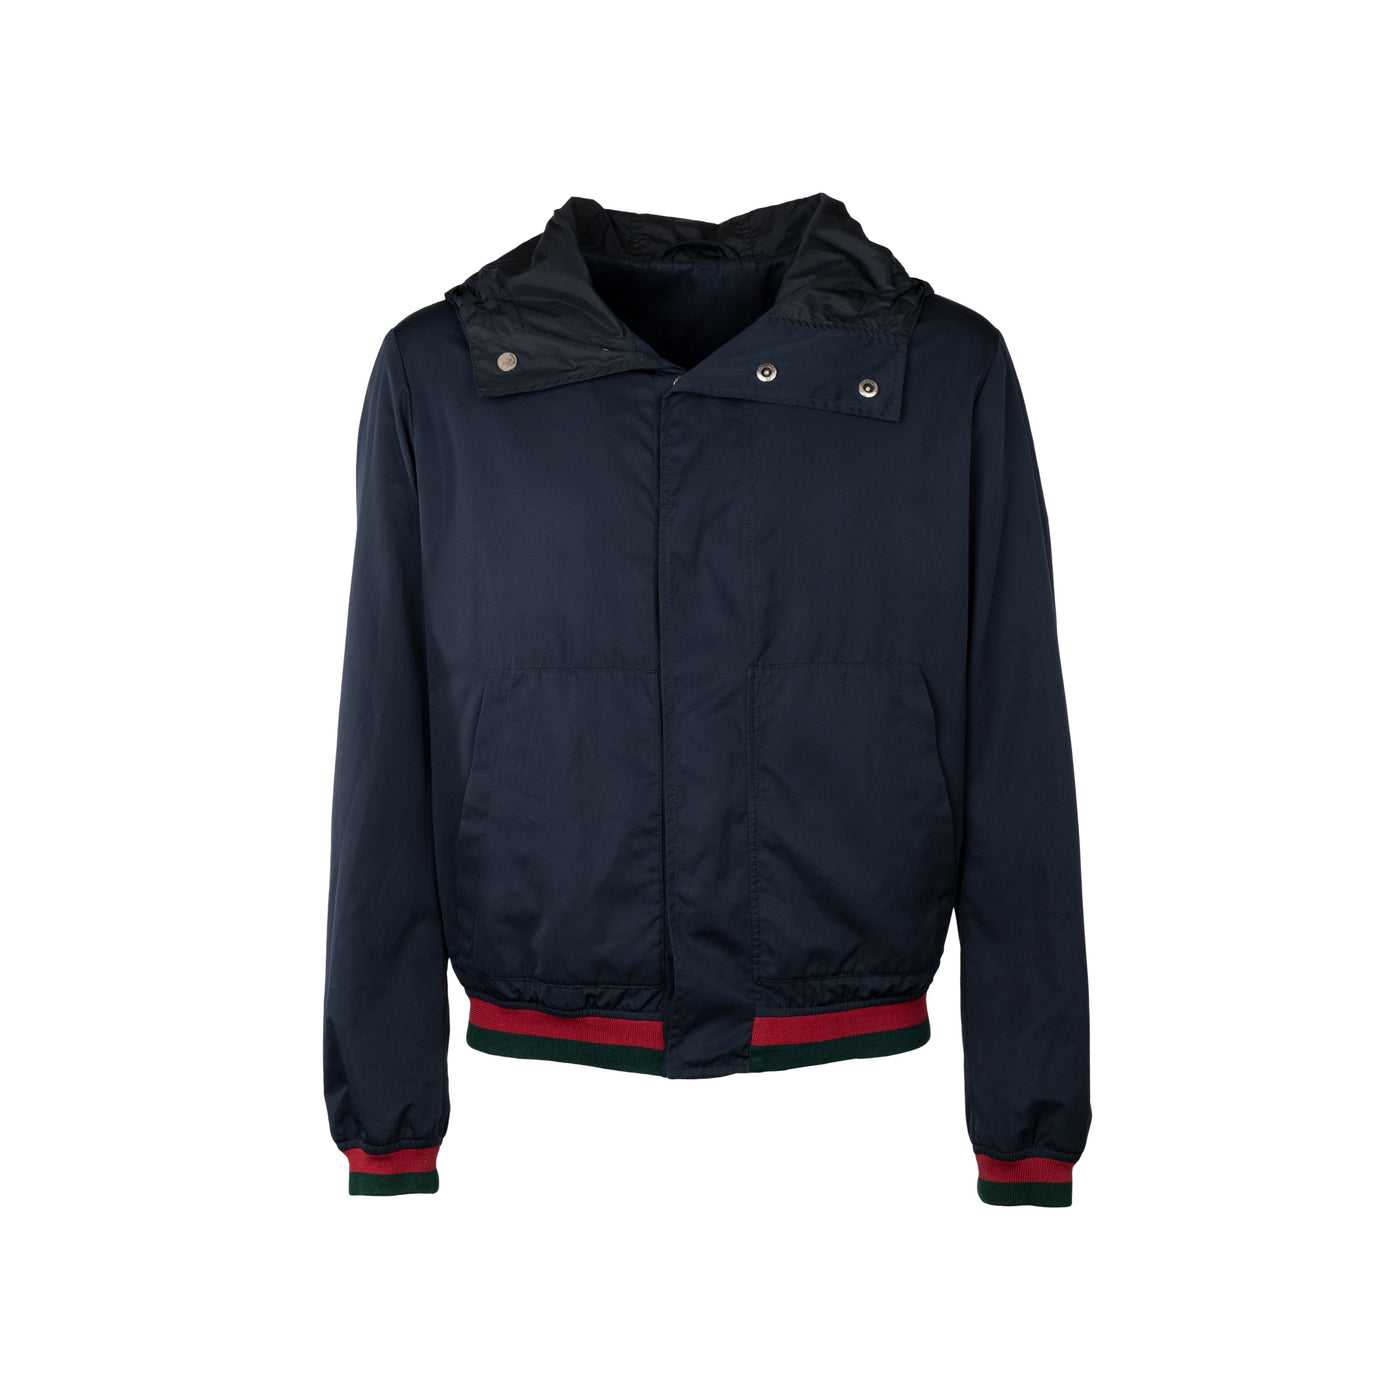 Gucci blue hooded jacket. Long sleeves, zip fastening, front pockets, ribbed hem with green and red details pre-owned